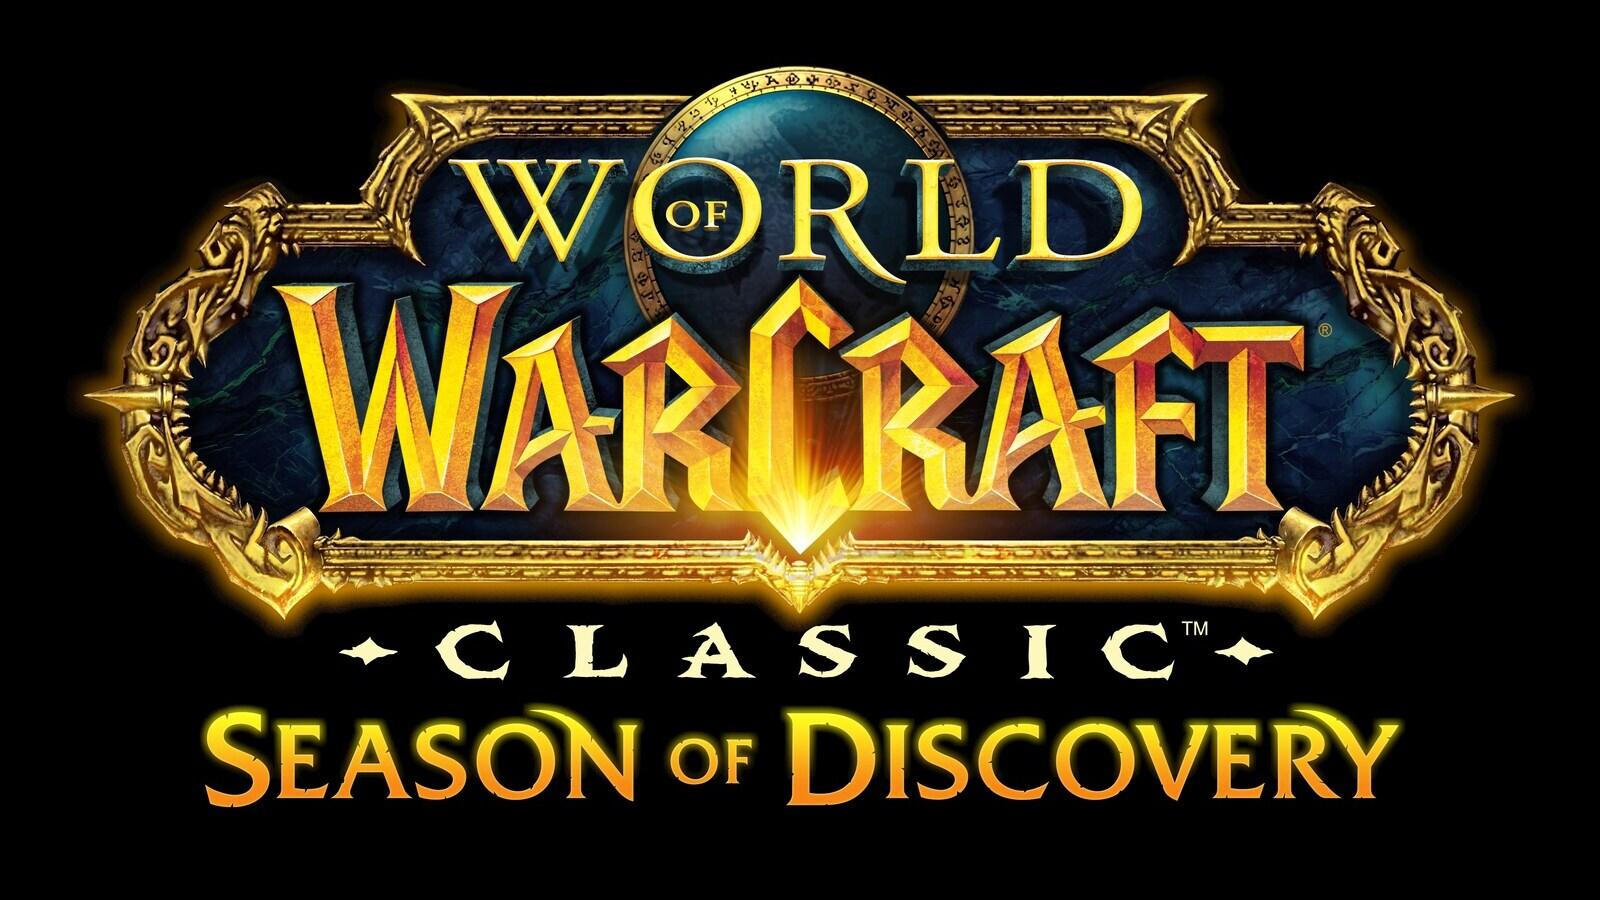 what-is-season-of-discovery-world-of-warcraft-classic-explained-dexerto